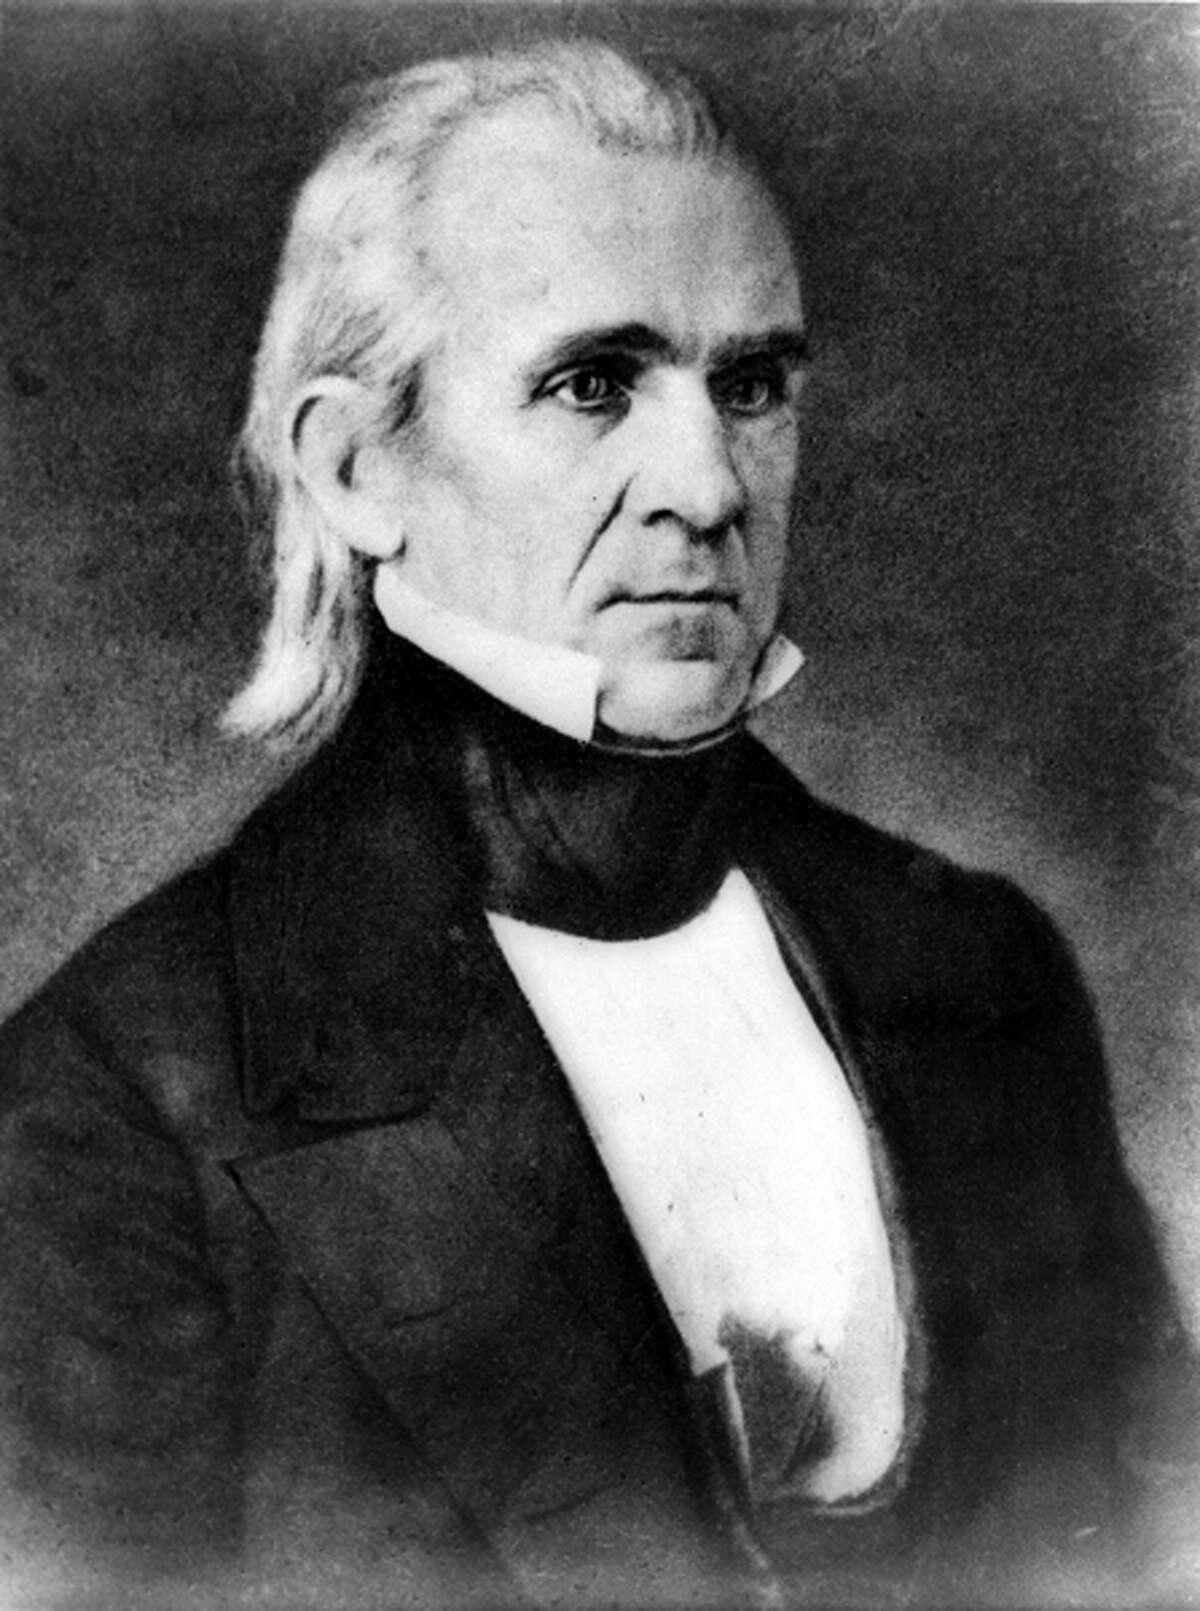 1845: U.S. President James Polk signs the act admitting Texas as a state. It was the first time a sovereign nation voluntarily gave up its sovereignty to become part of another nation (the opposite of secession).